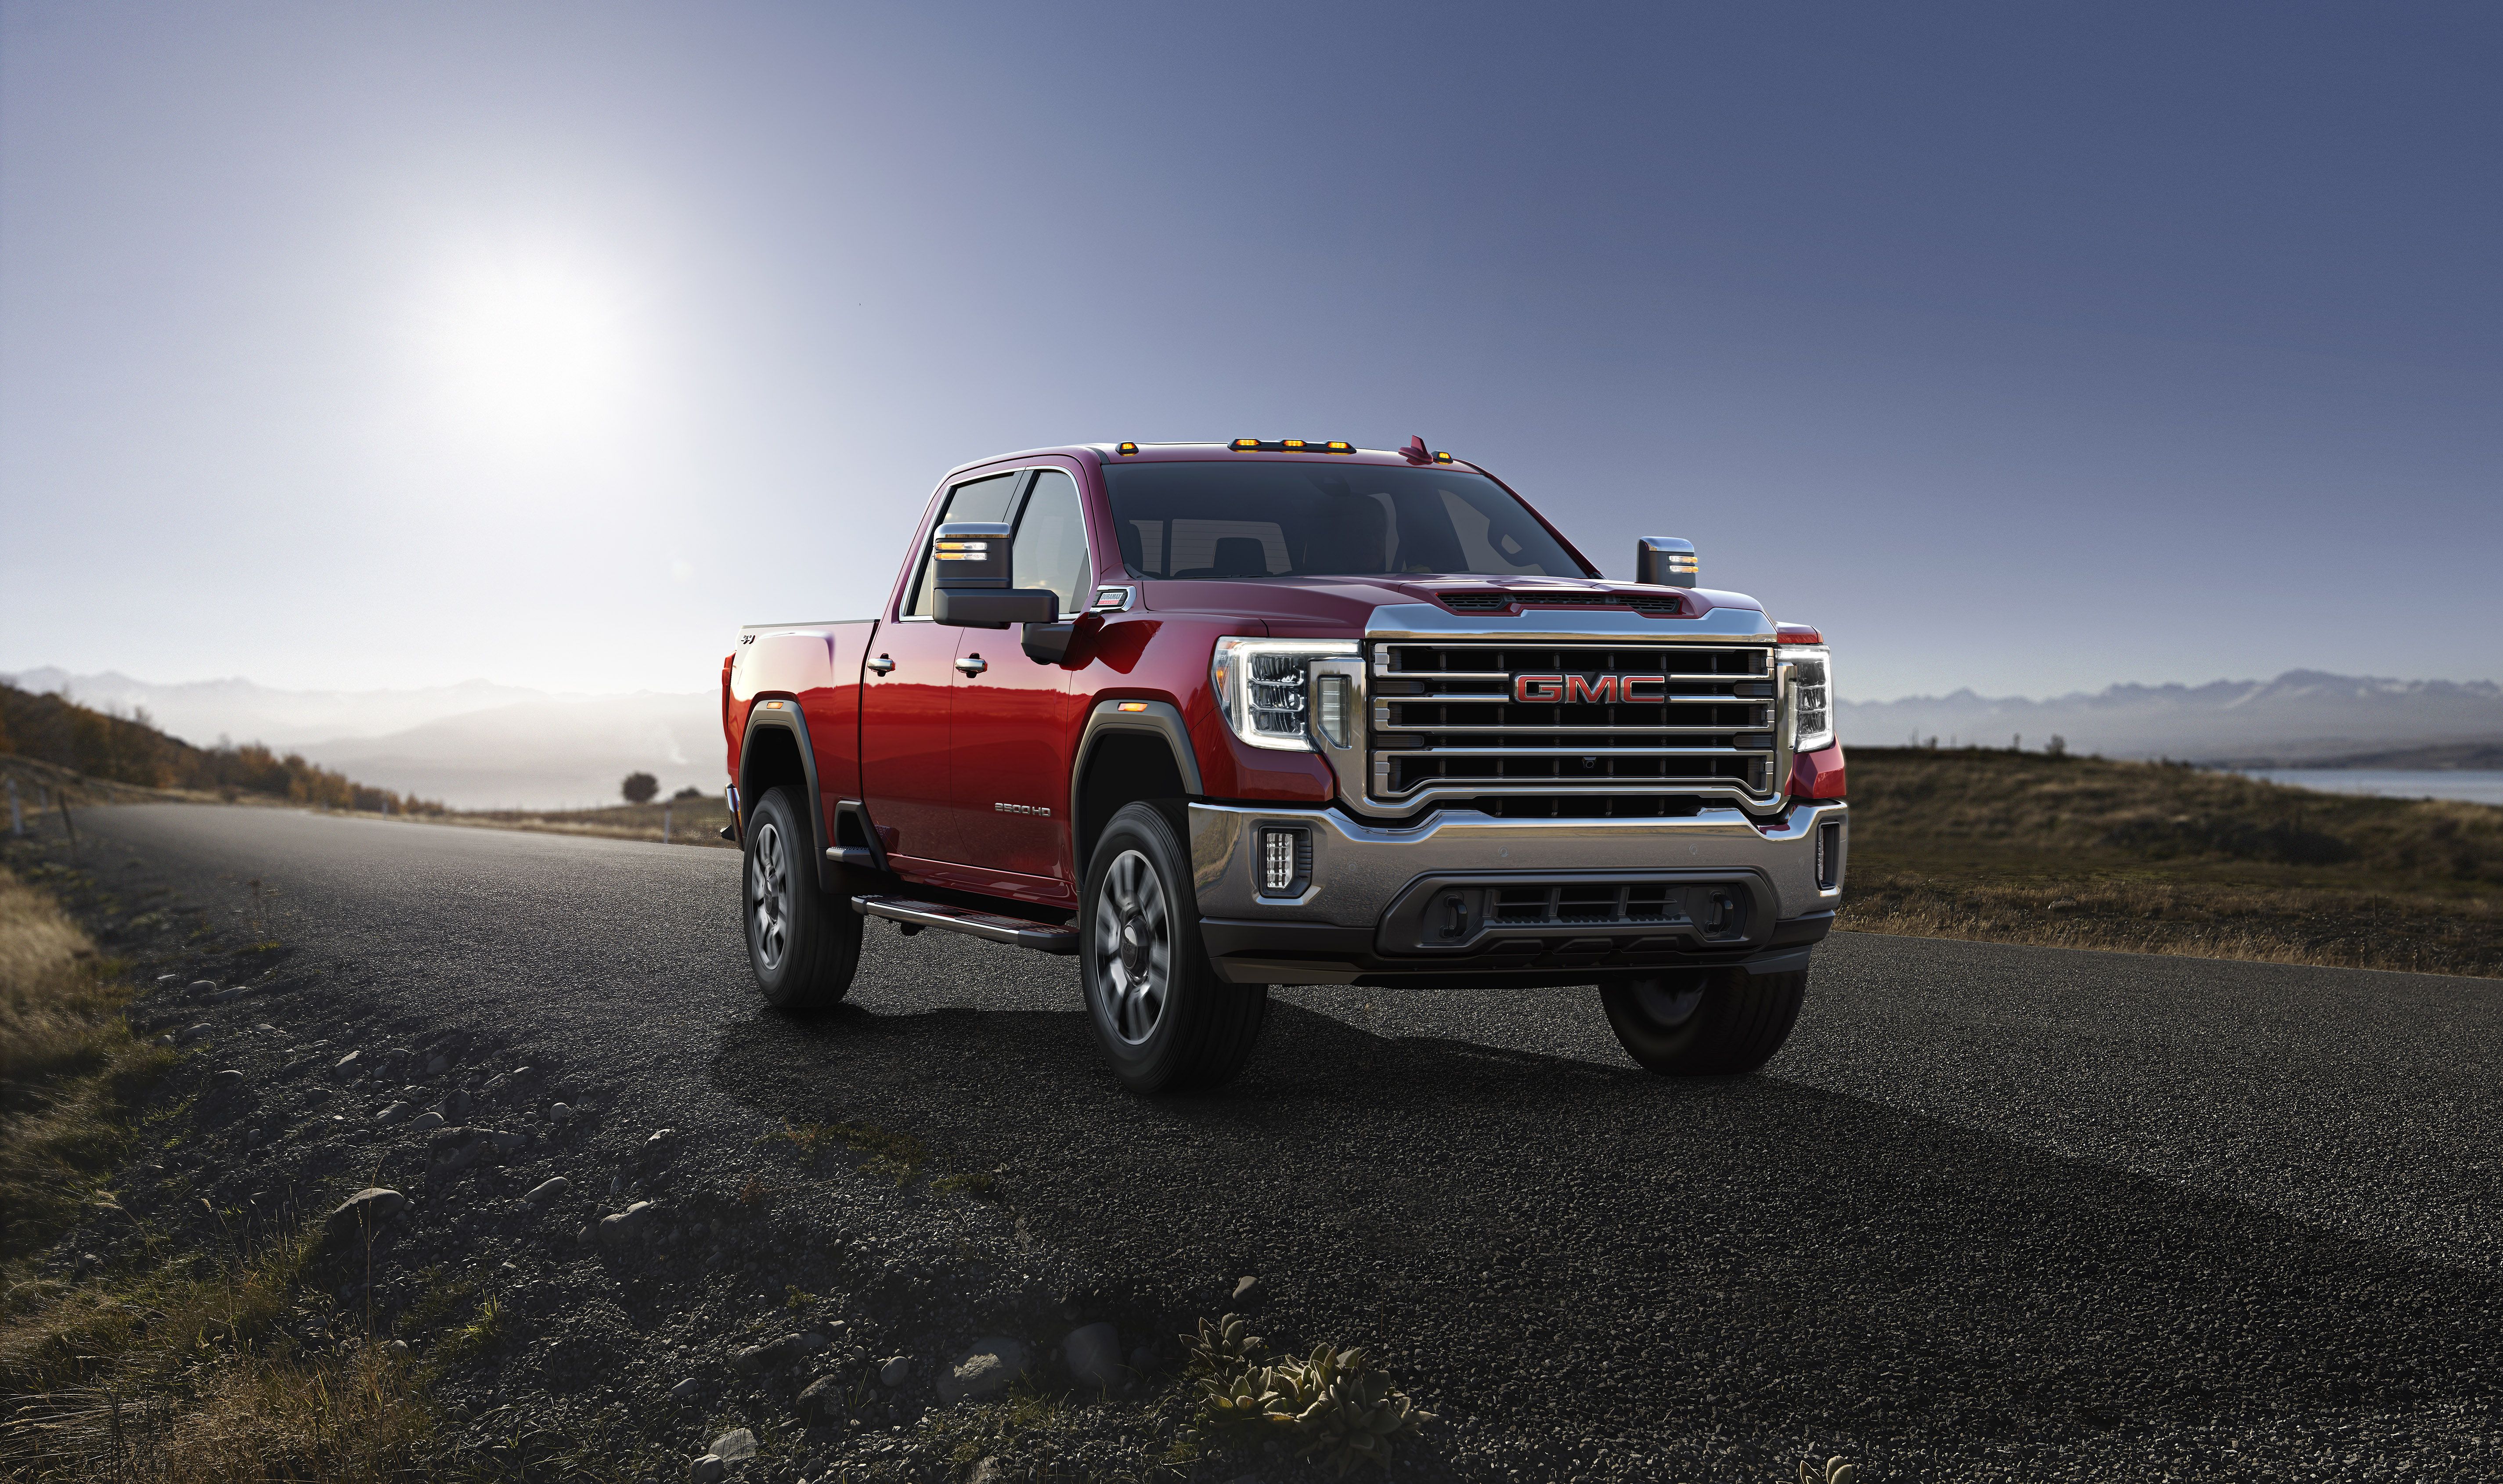 2019 The 2019 Ram 2500 HD Just Got Some Serious Competition In the Form of the 2020 GMC Sierra HD